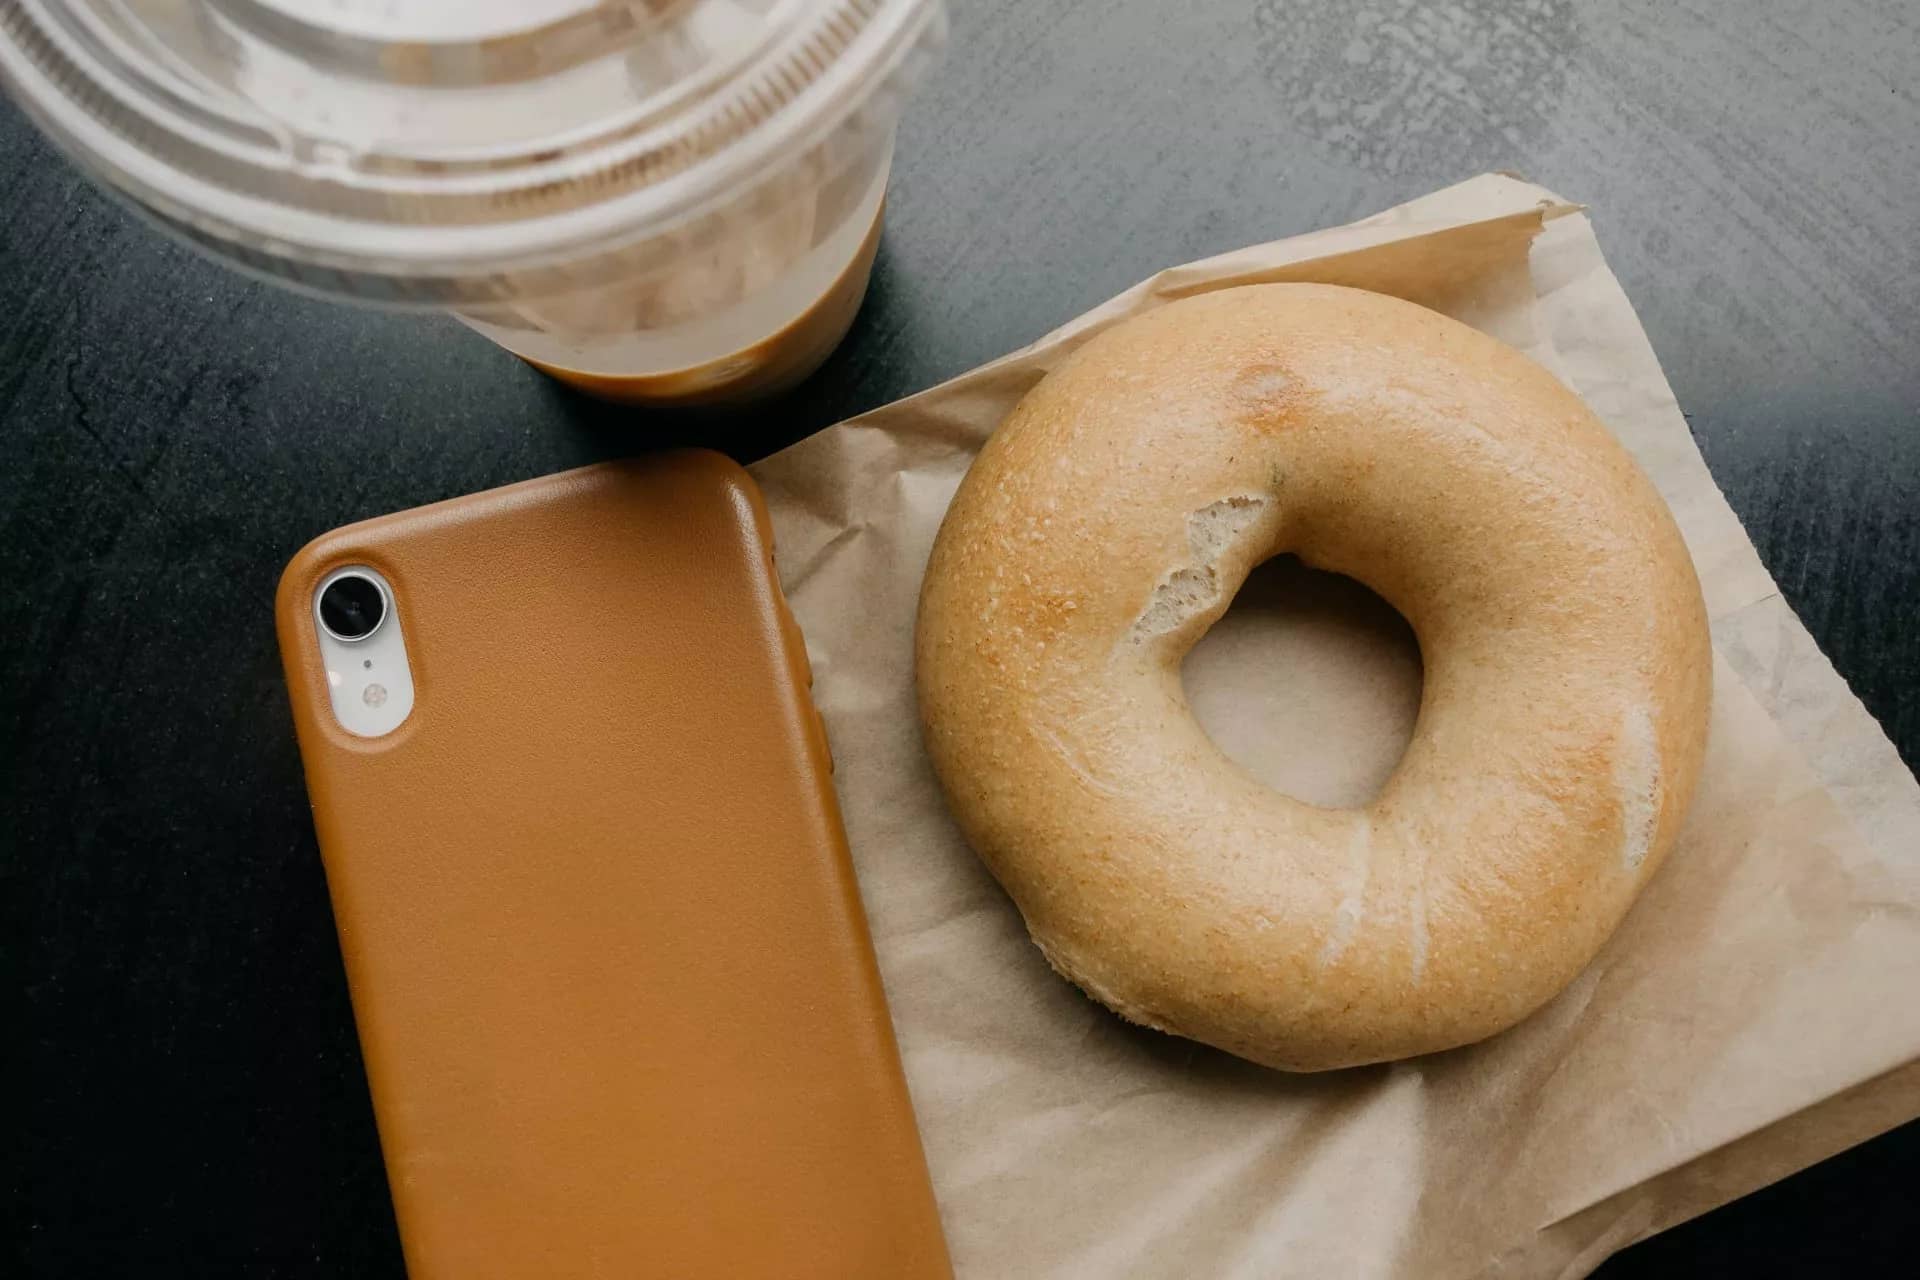 Bagel next to coffee and phone